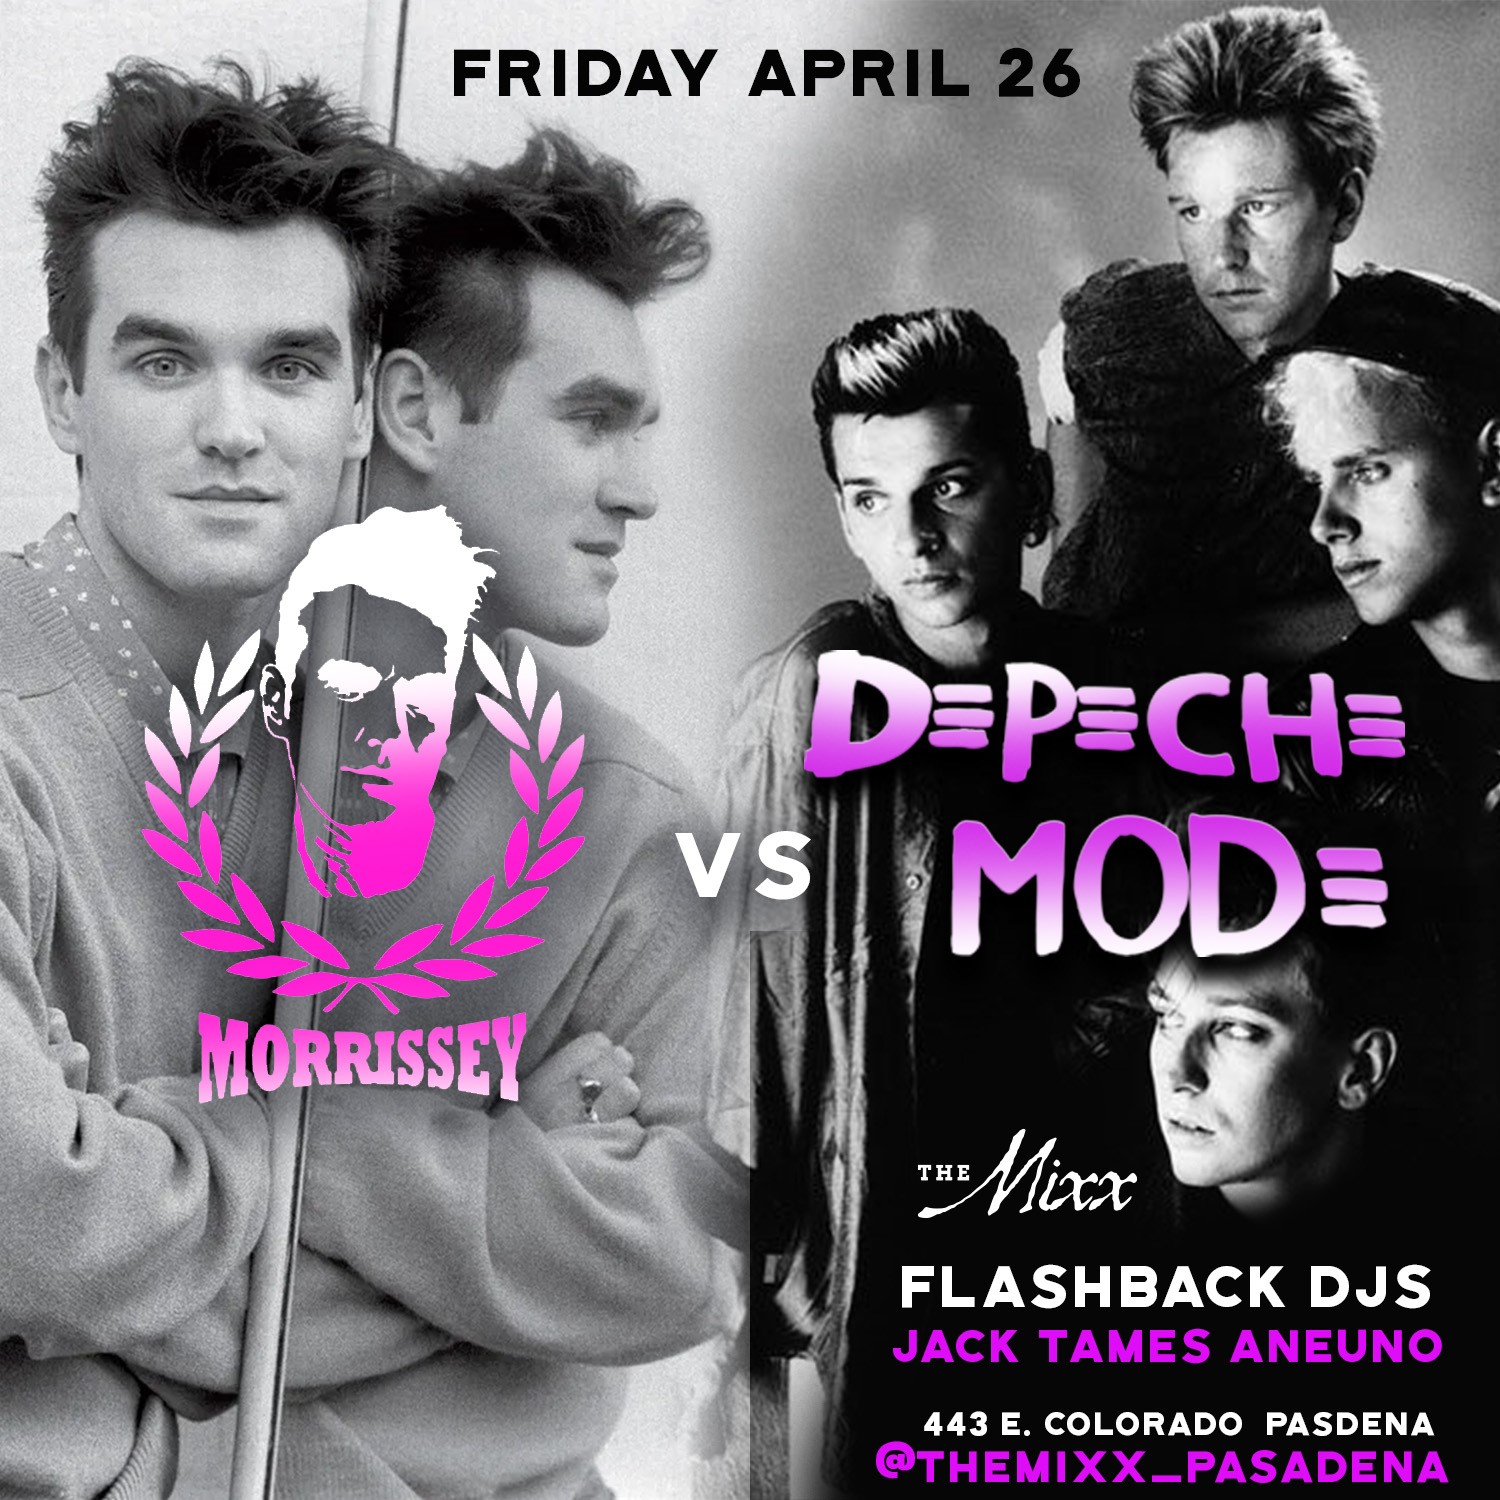 Live Double Feature to Depeche Mode, Morrissey & The Smiths